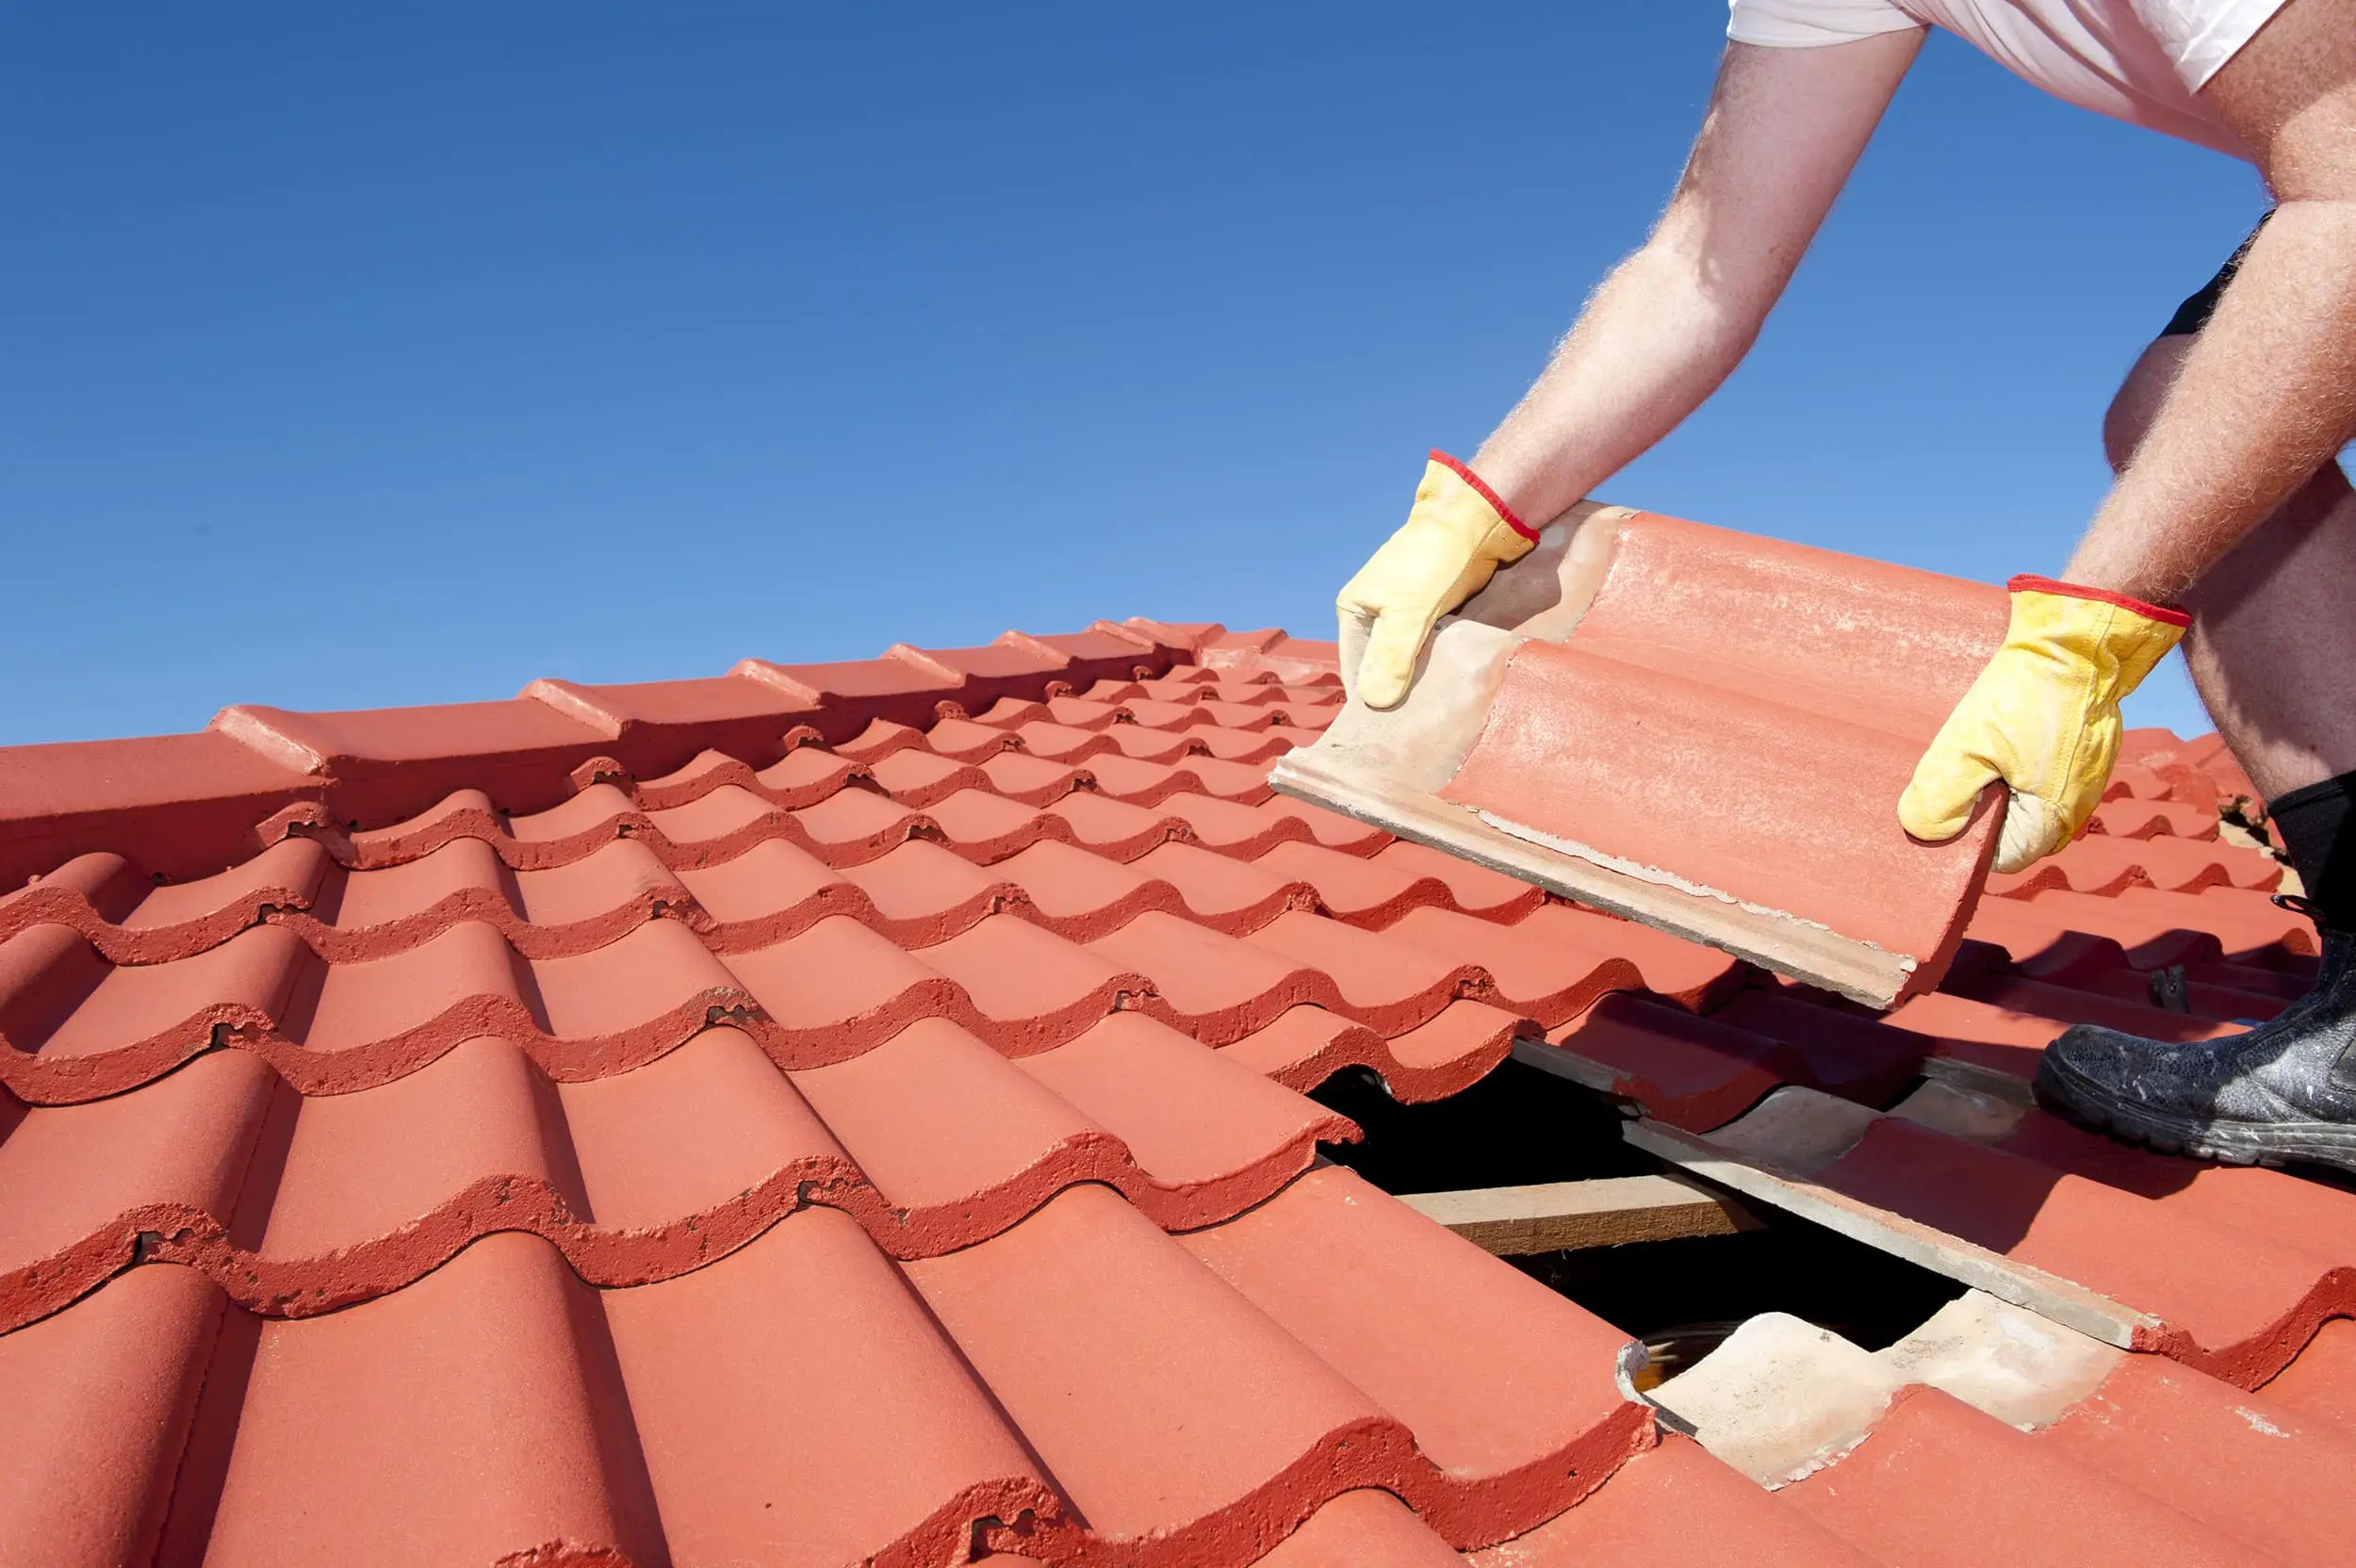 Roof Repair, Worker With Yellow Gloves Replacing Red Tiles Or Shingles On House With Blue Sky As Background And Copy Space.